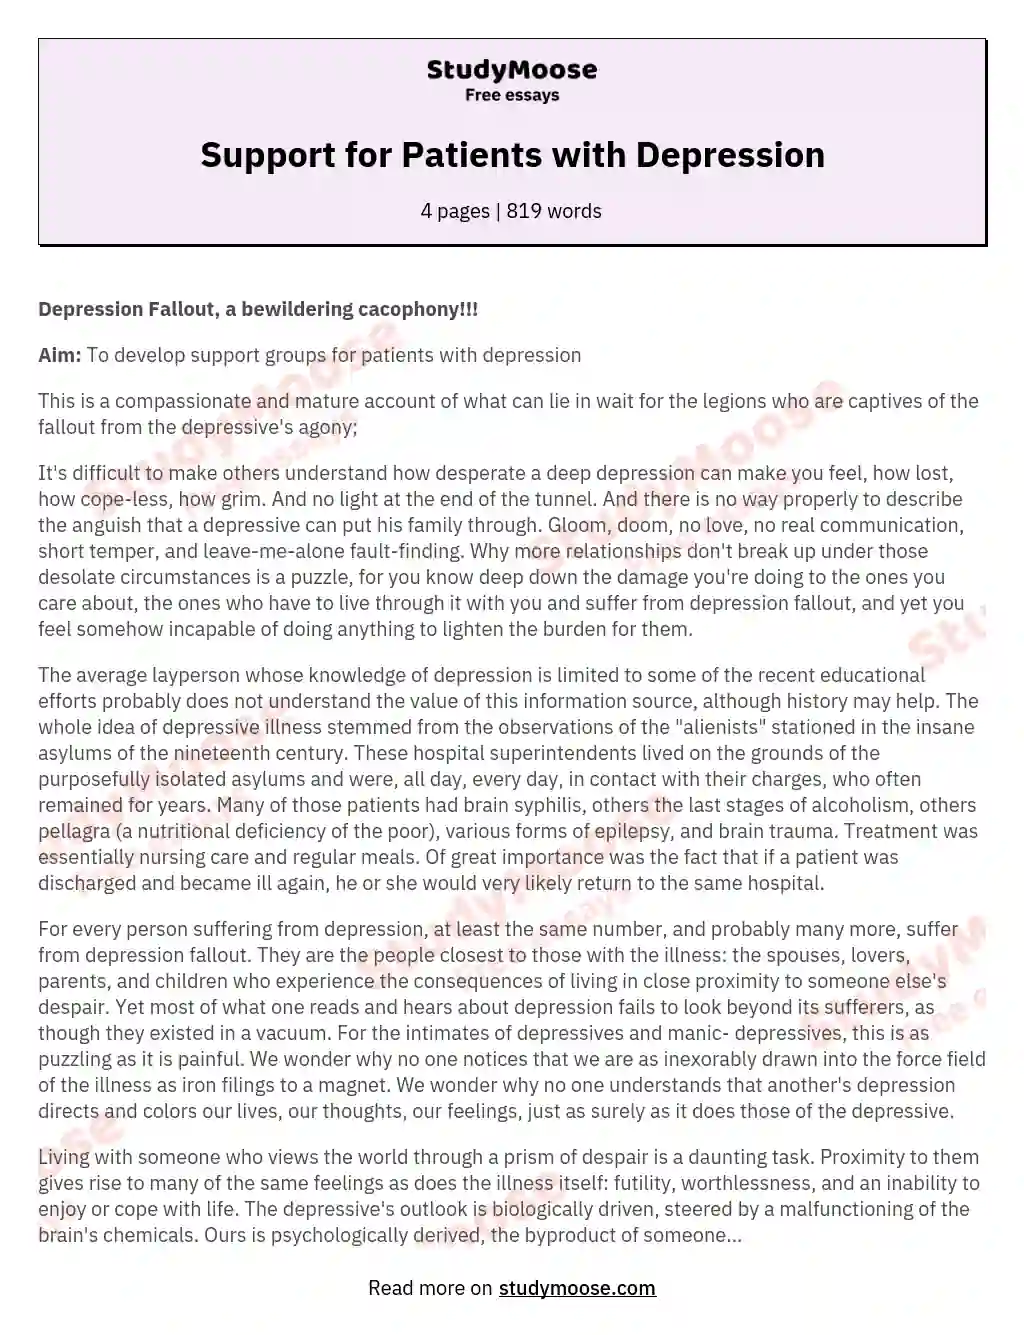 Support for Patients with Depression essay